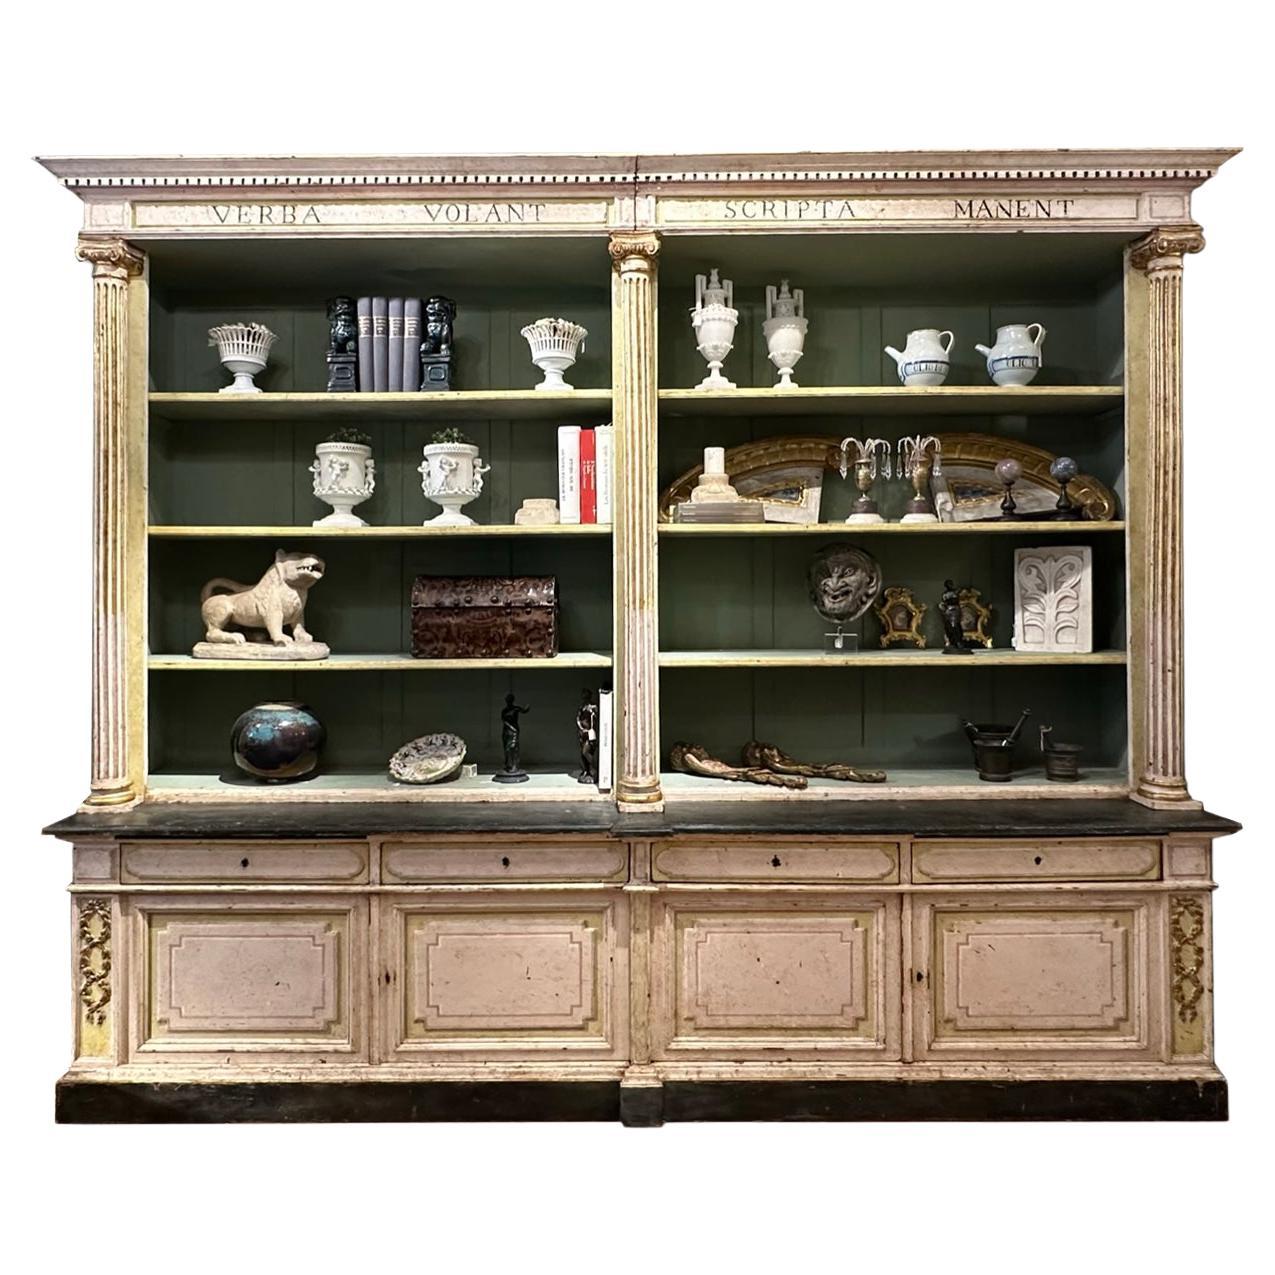 Late 18th Century Tuscany Lacquered Bookcase